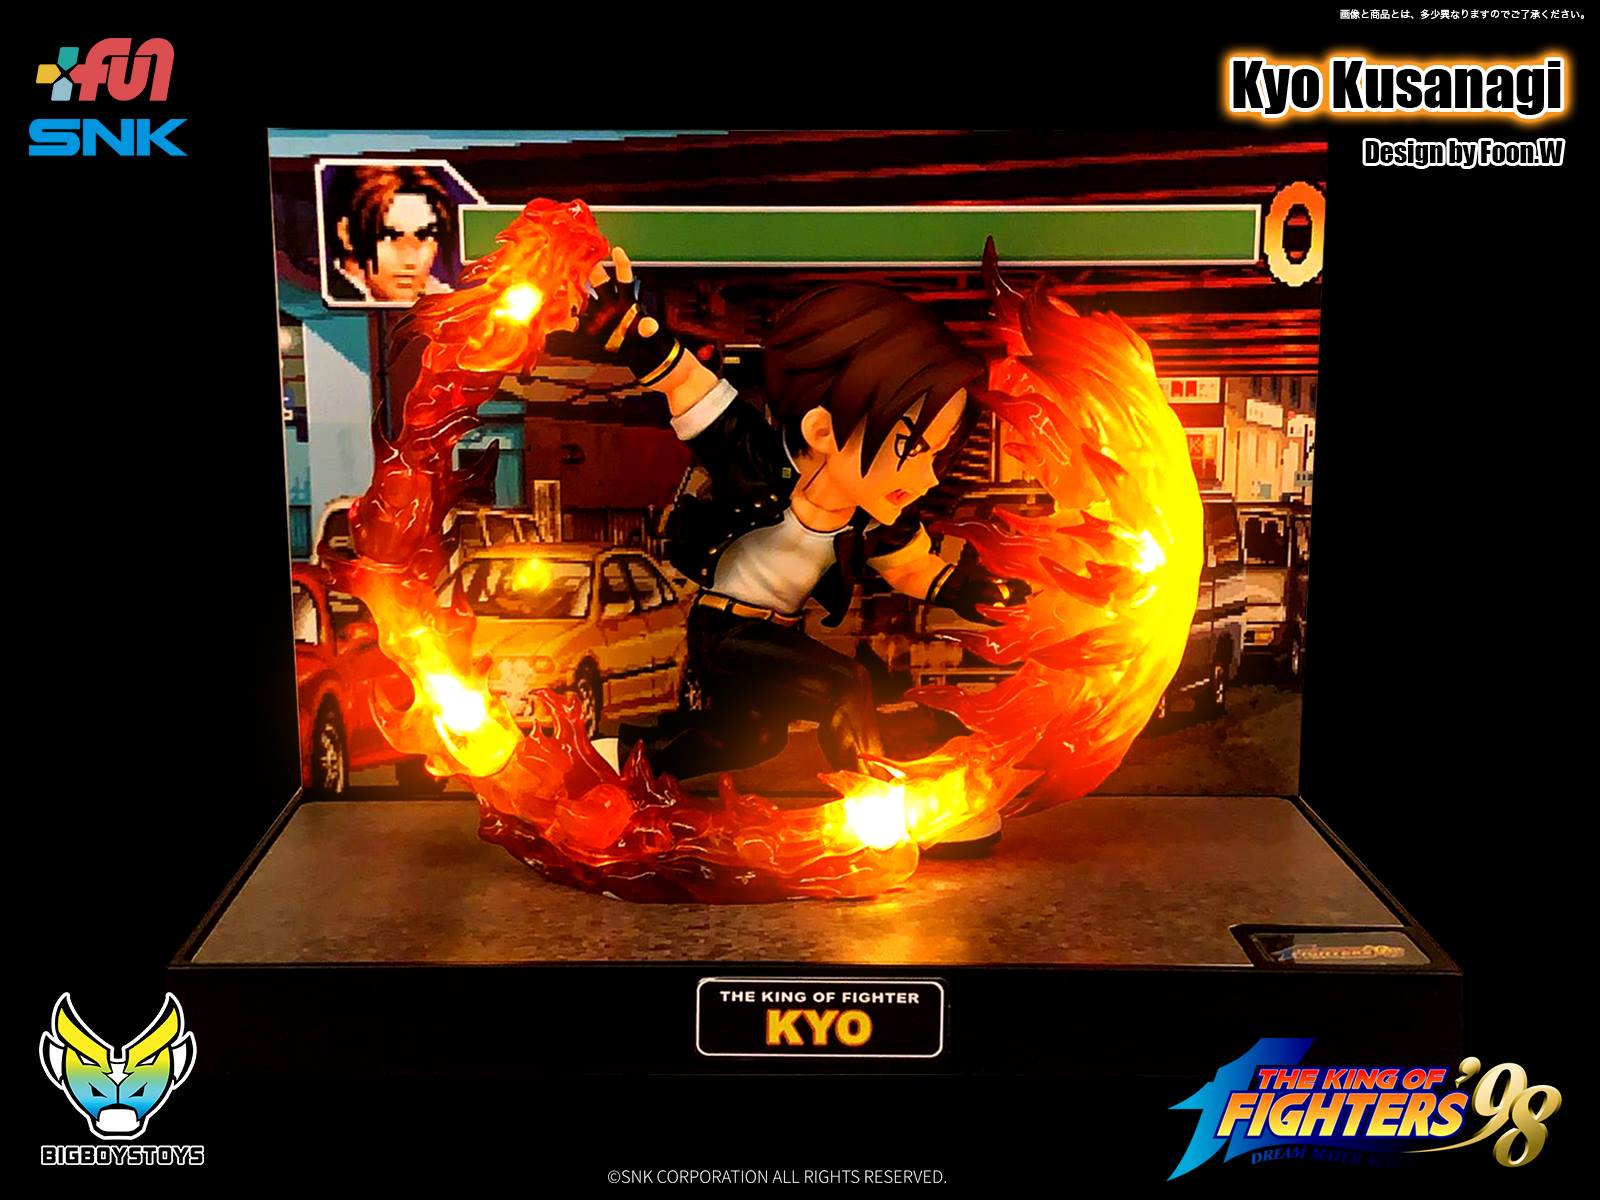 Bigboystoys - The King of Fighters &#39;98 - The New Challenger Series T.N.C.-KOF01 - Kyo Kusanagi - Marvelous Toys